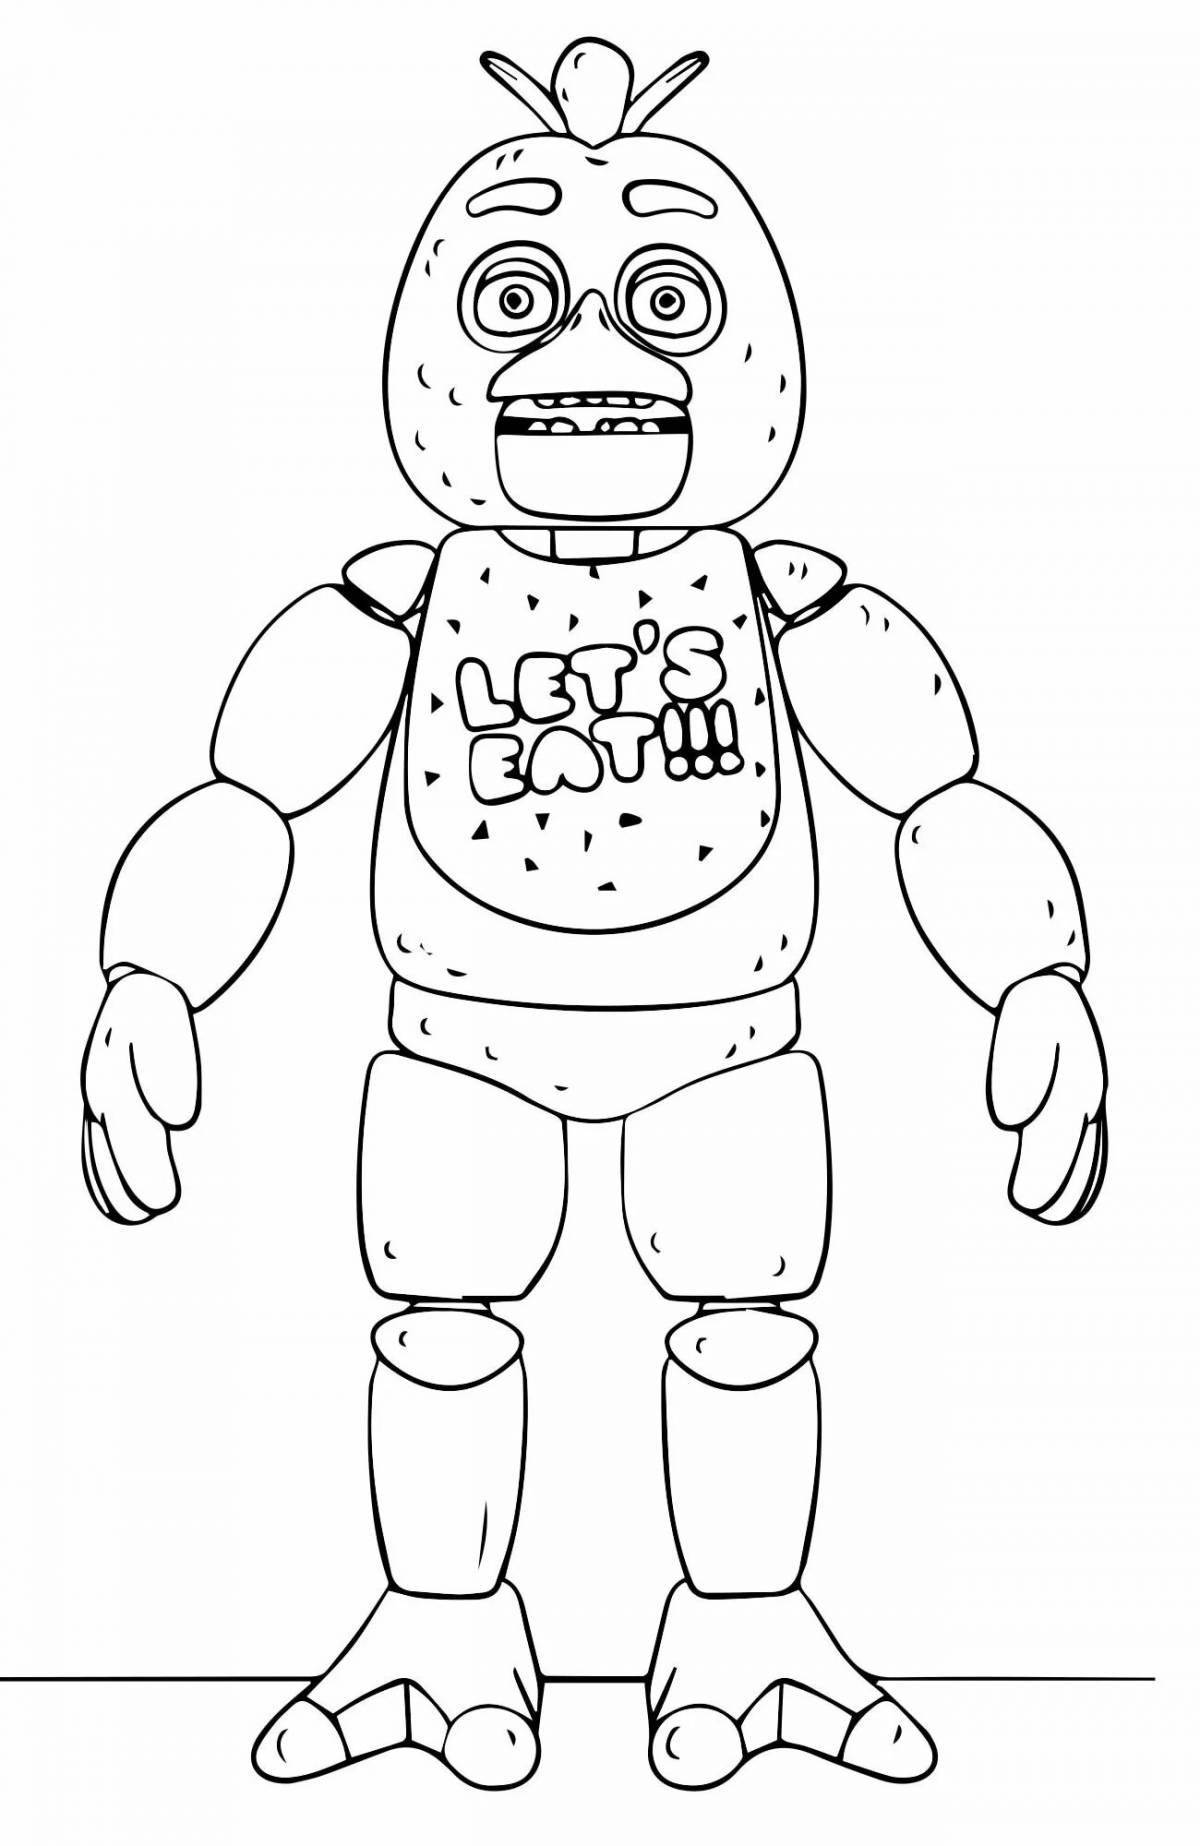 Lovely animatronics coloring page